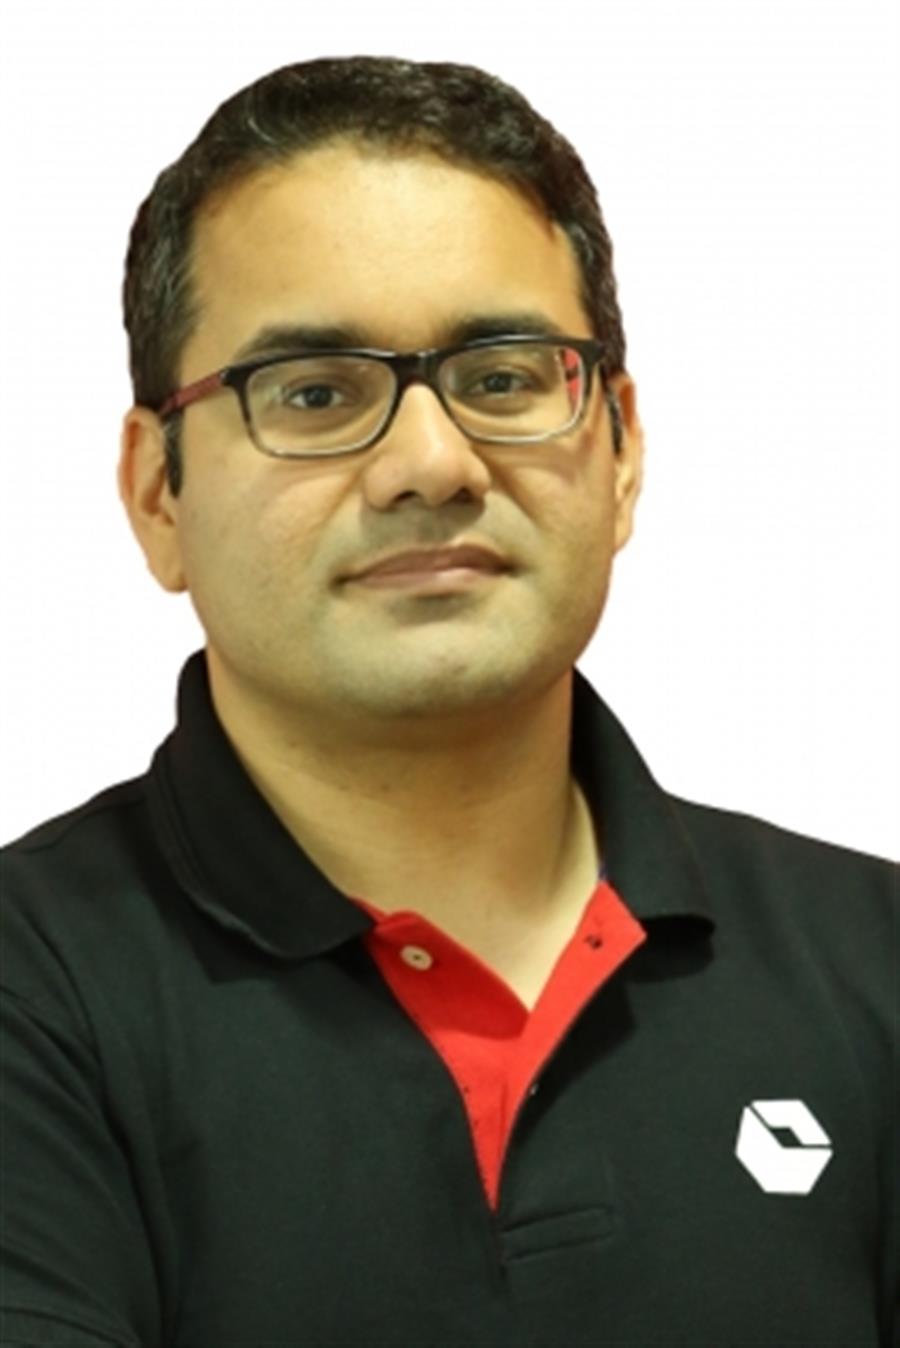 Protein supplements created serious health issues for me, reveals Snapdeal's Kunal Bahl